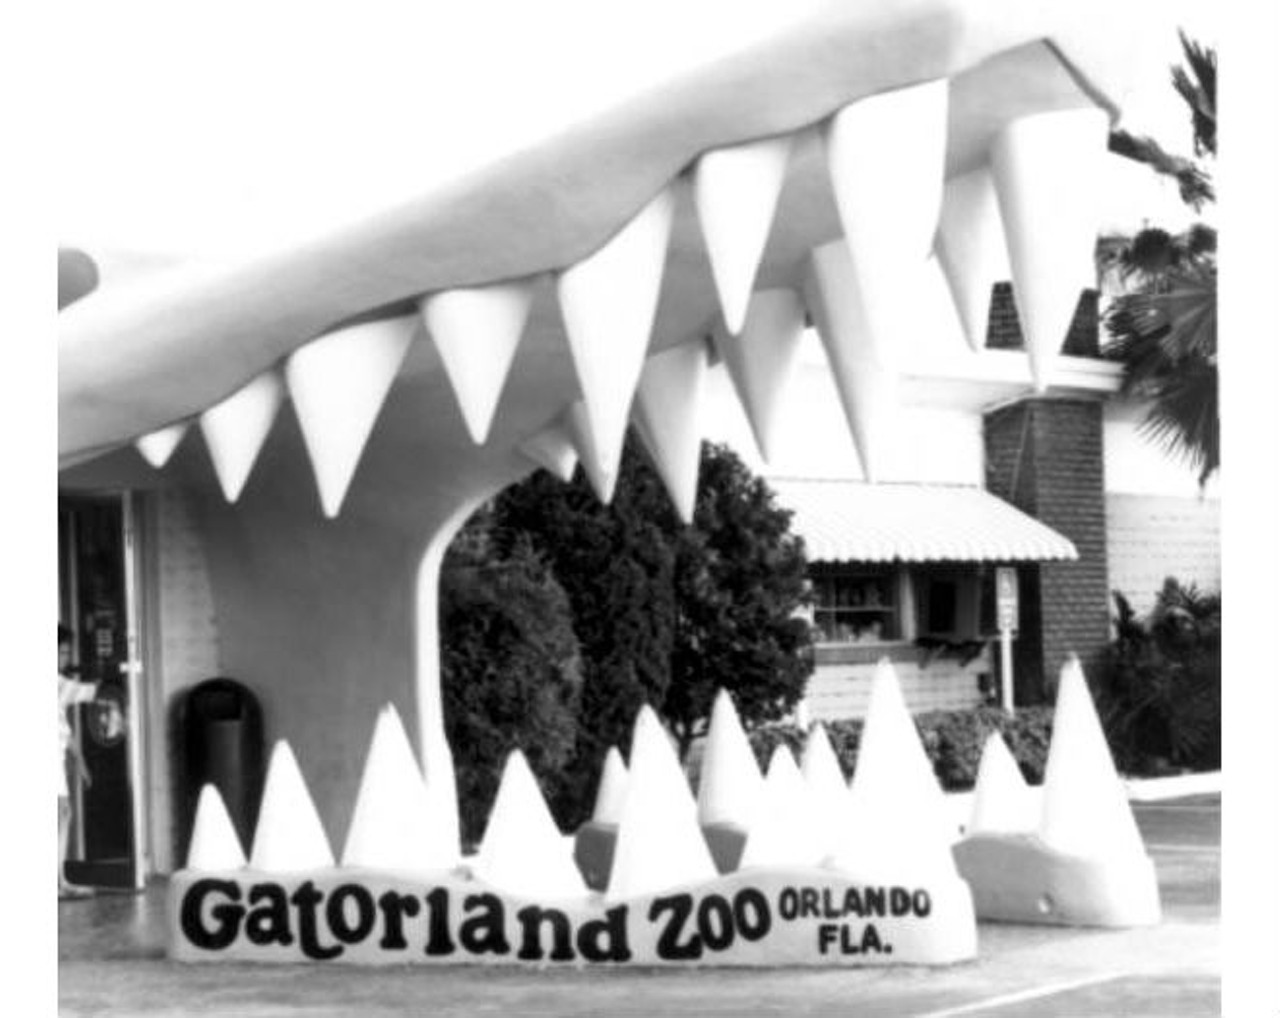 Entrance to the Gatorland theme park.State Archives of Florida, Florida Memory